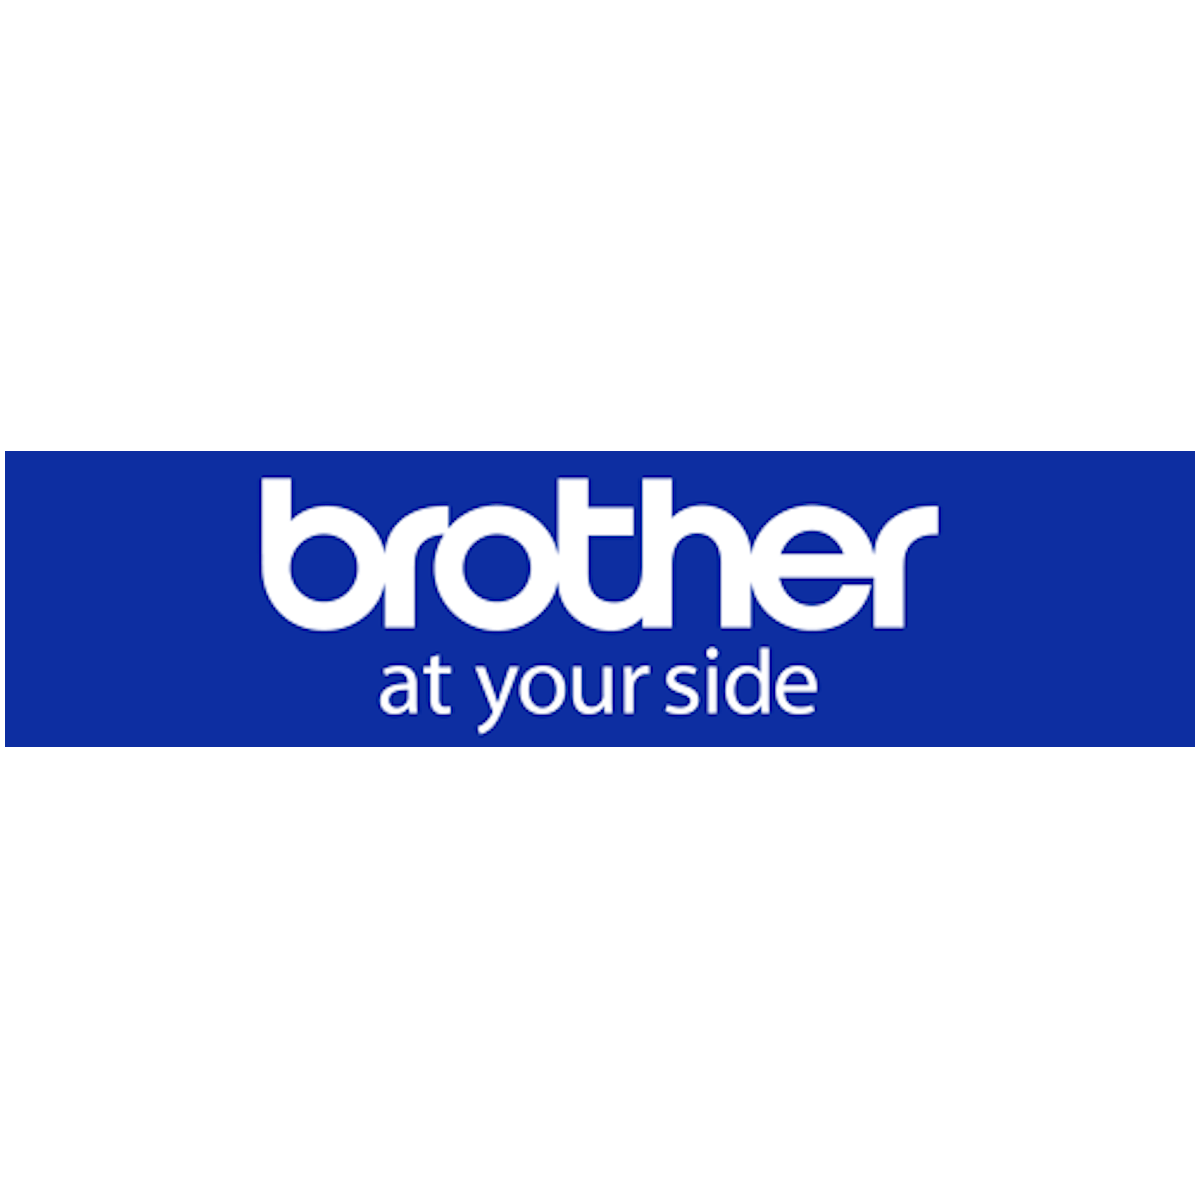 Brother Logo Atyourside New 500x123